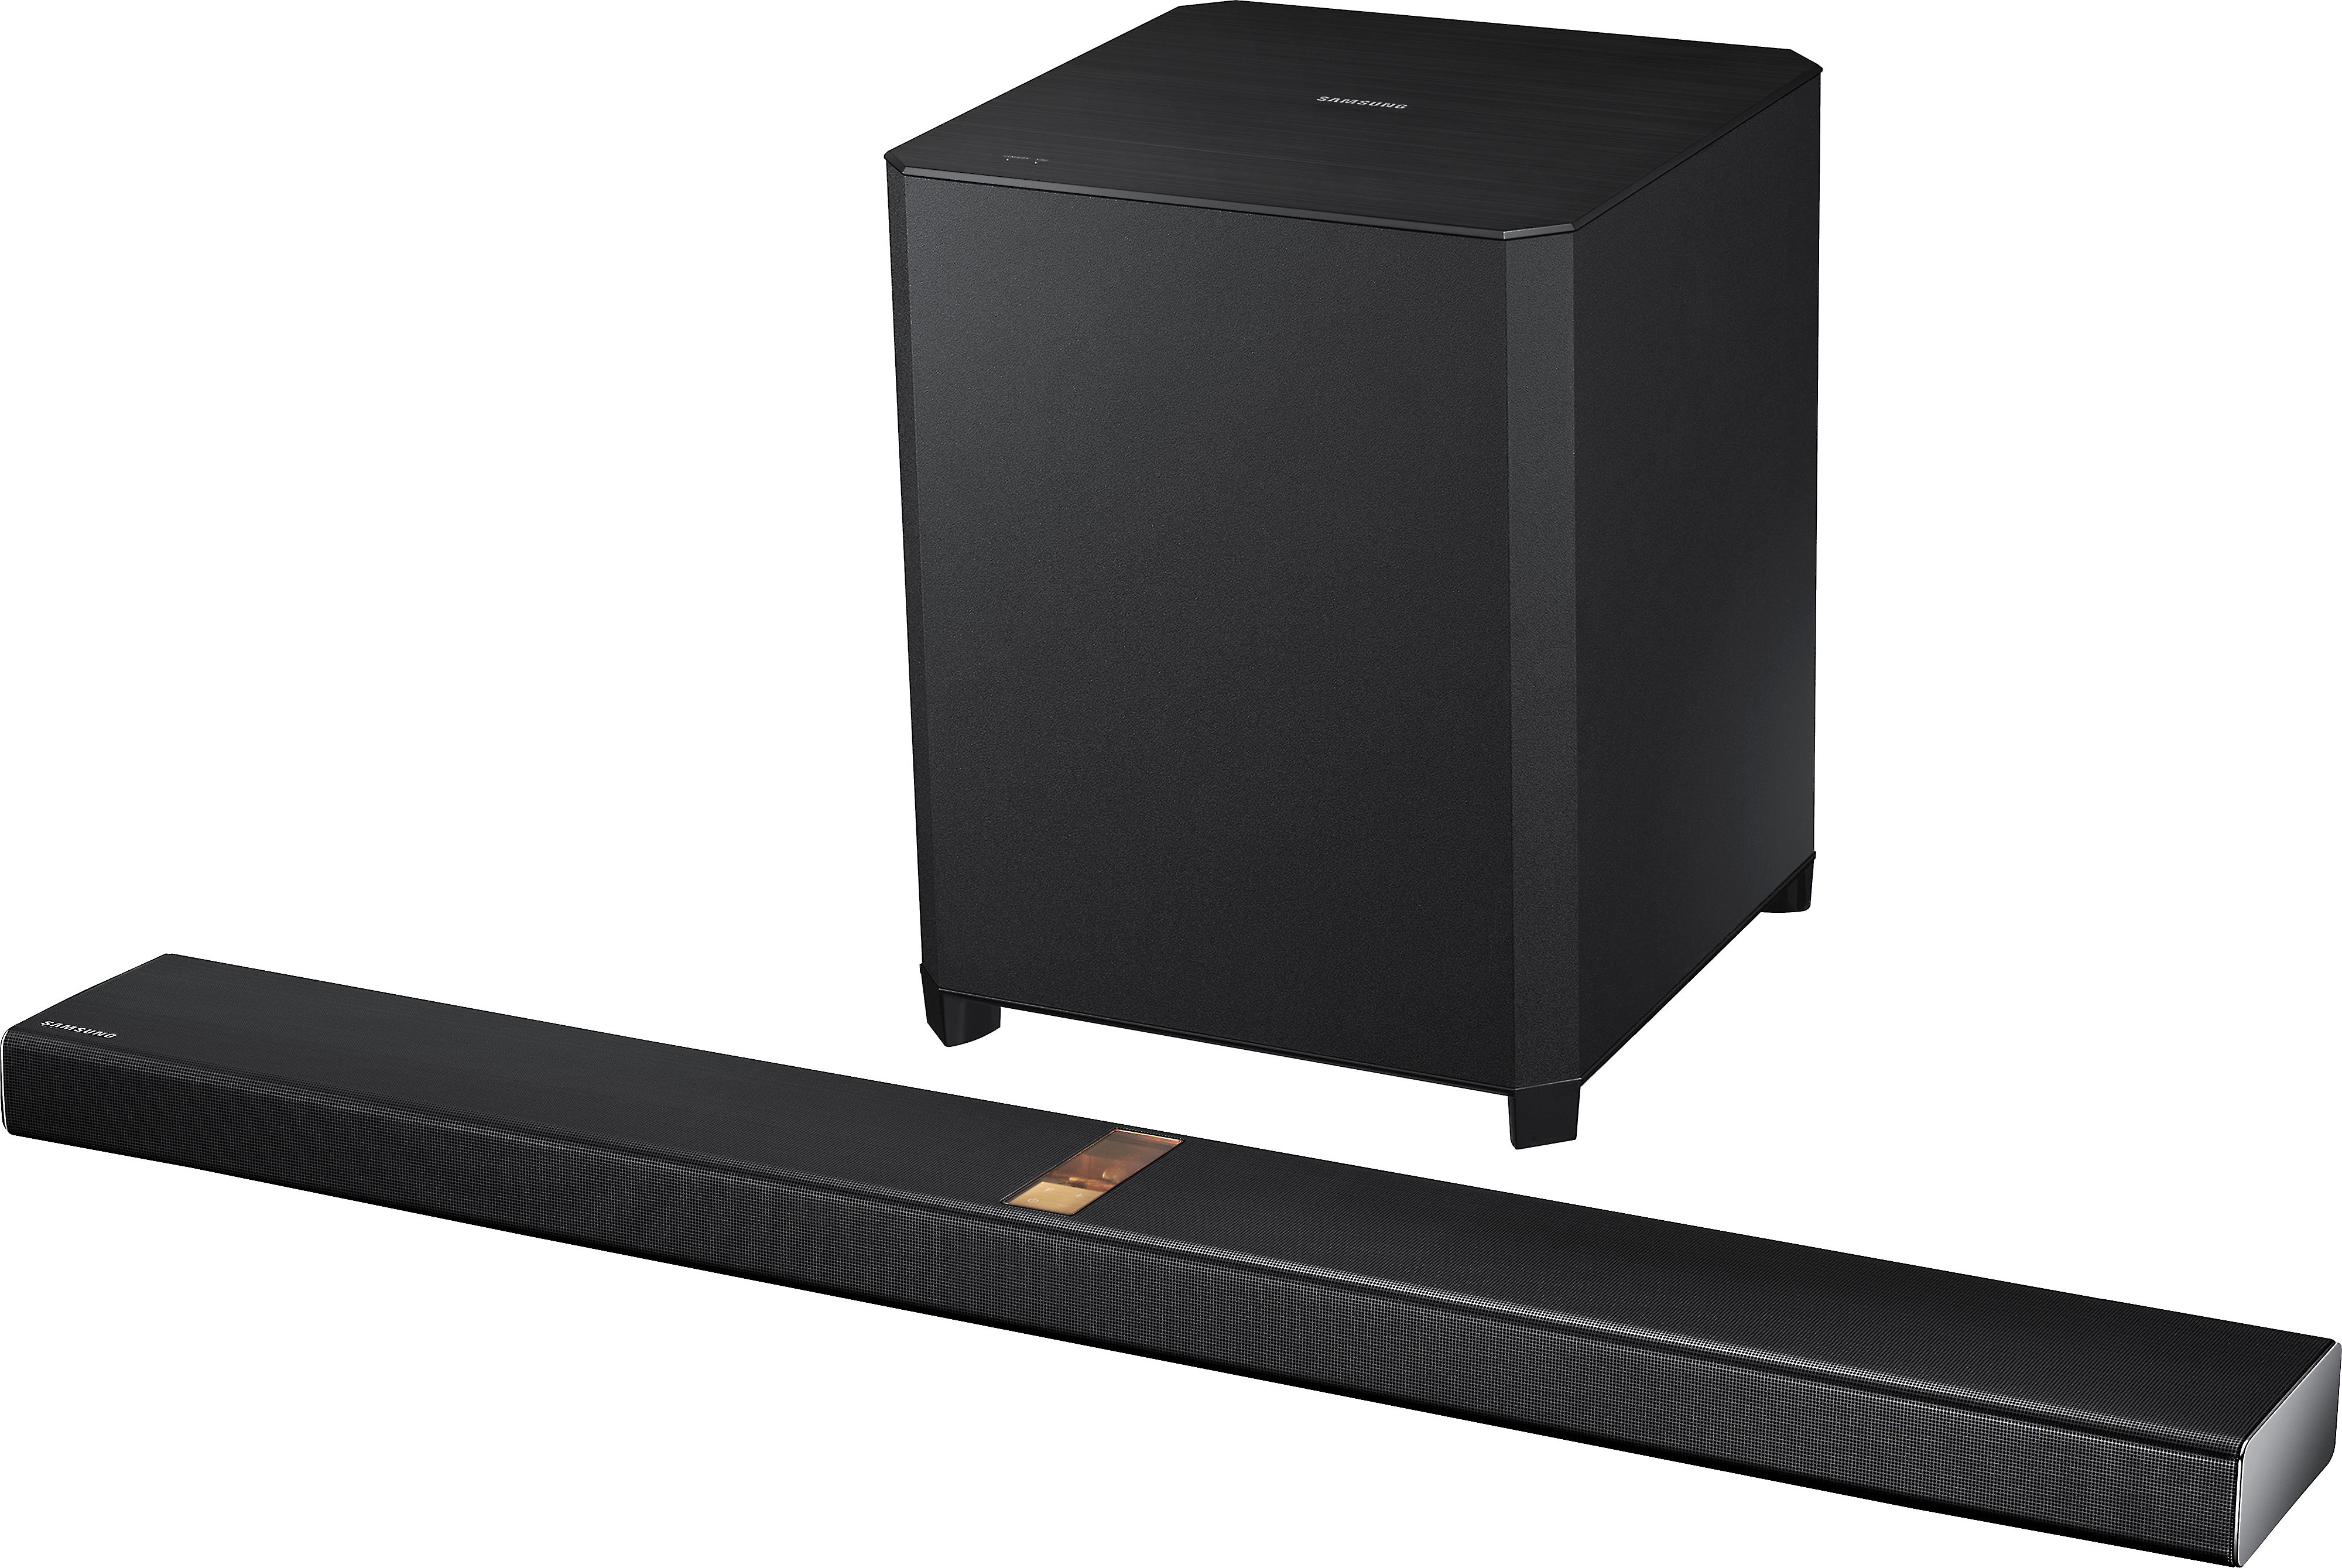 Samsung HW-H750 Powered home theater 